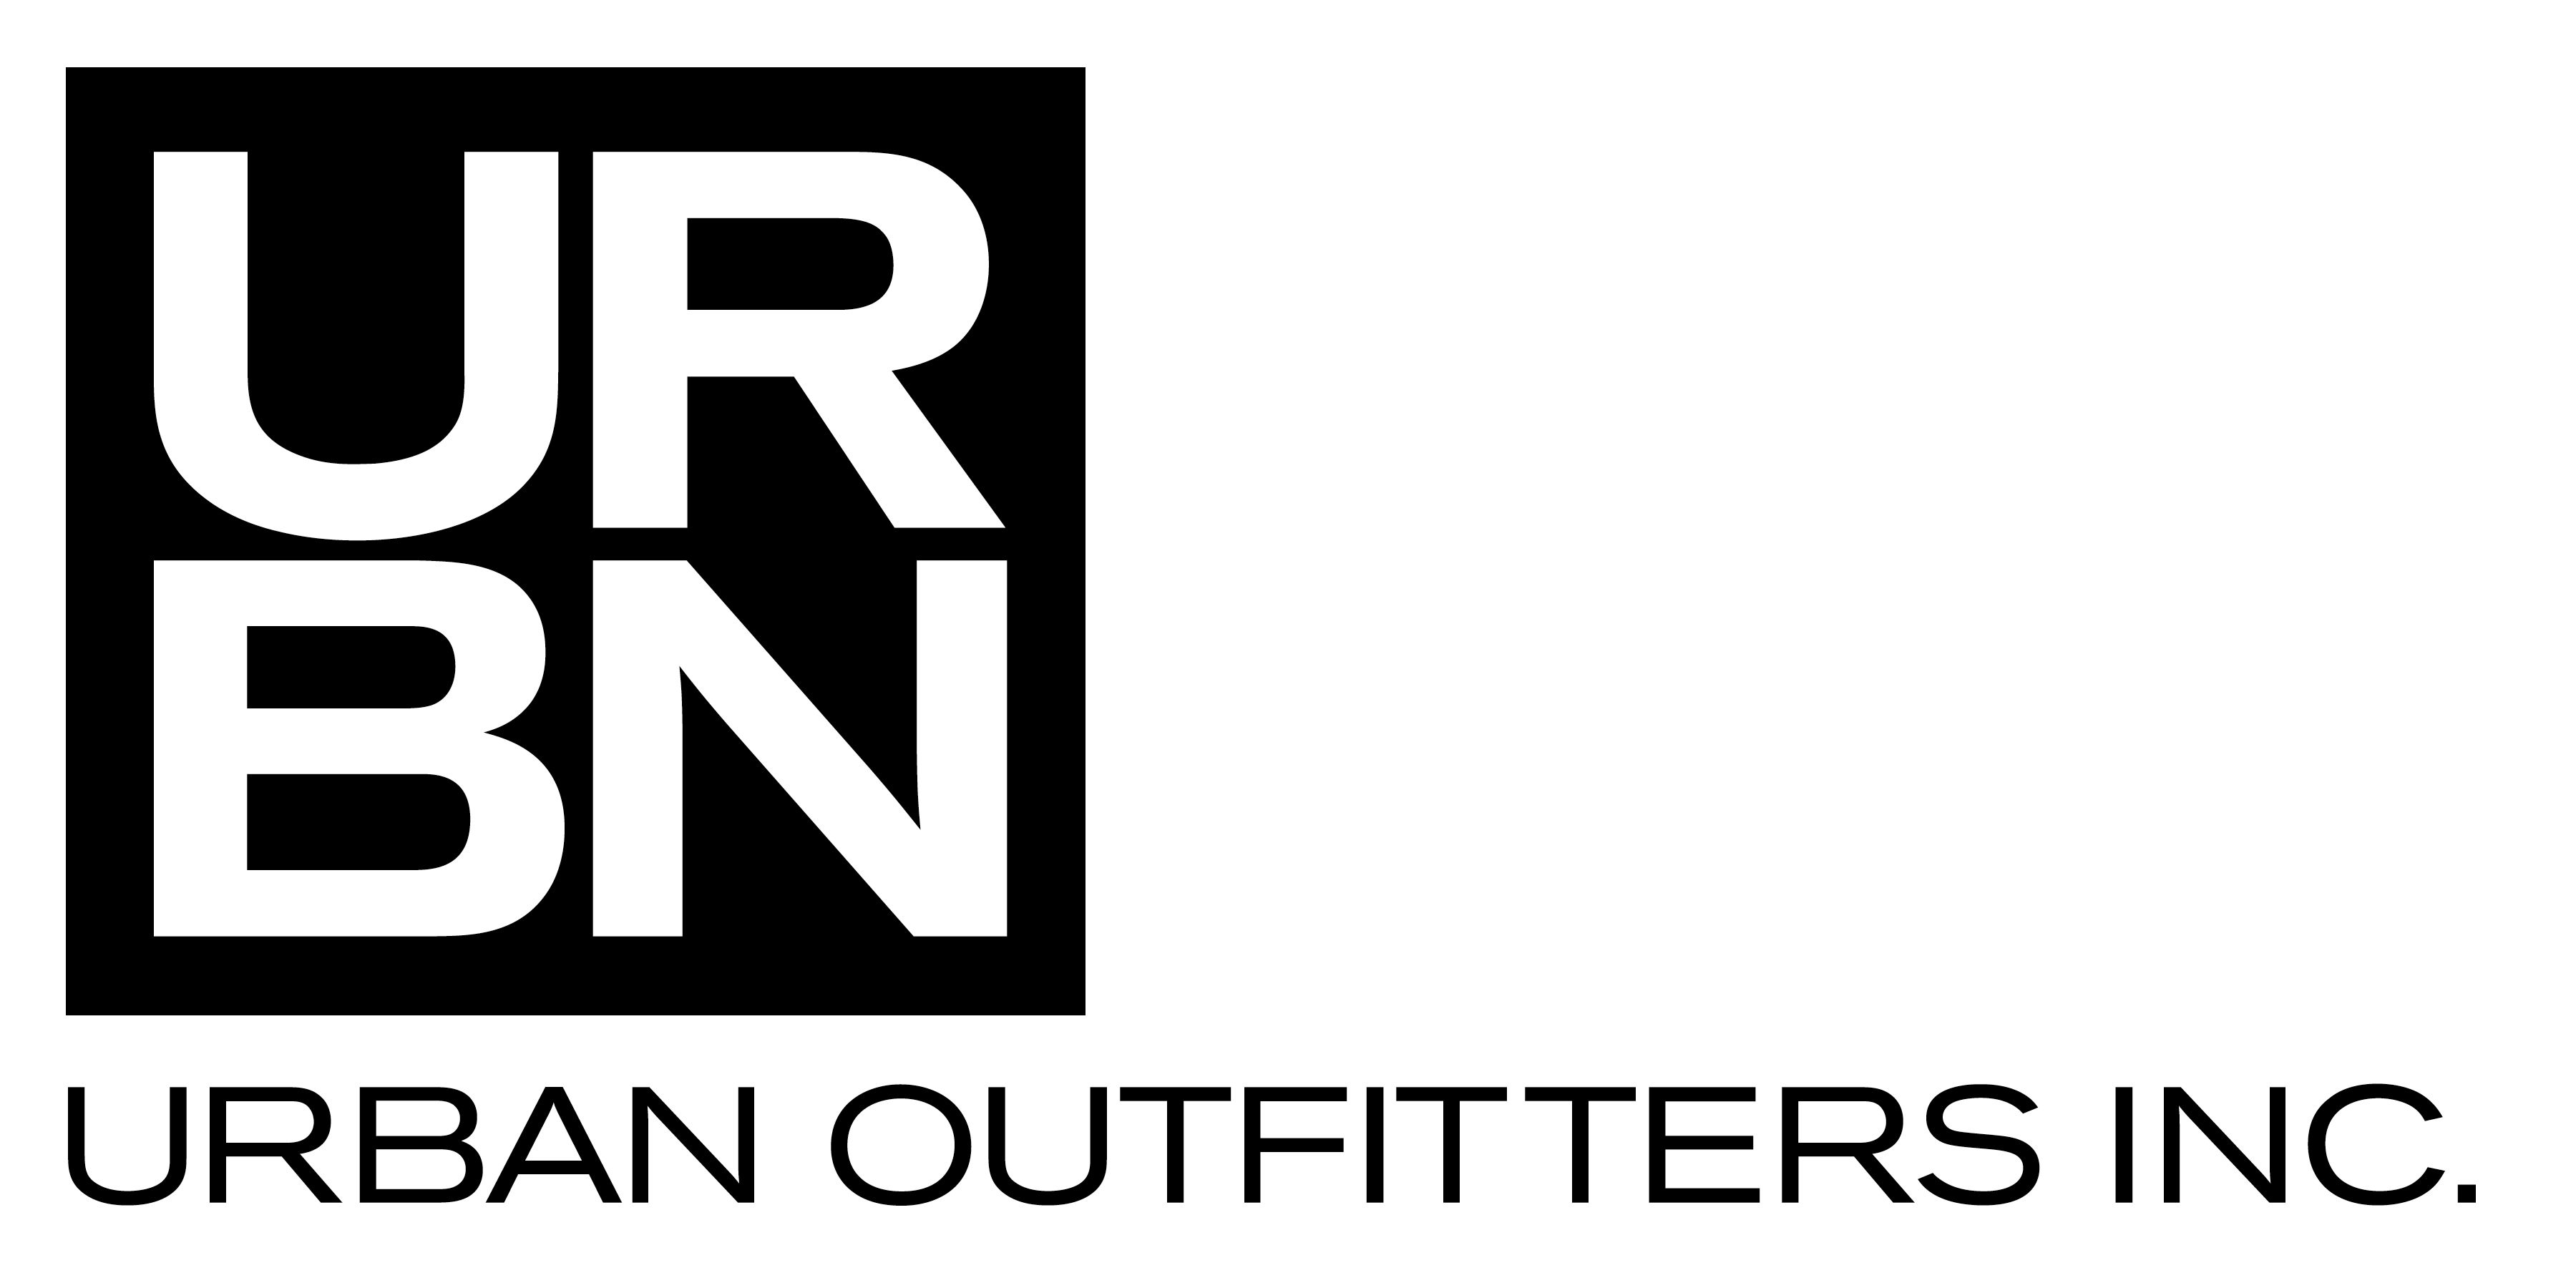 Urban Outfitters Inc.